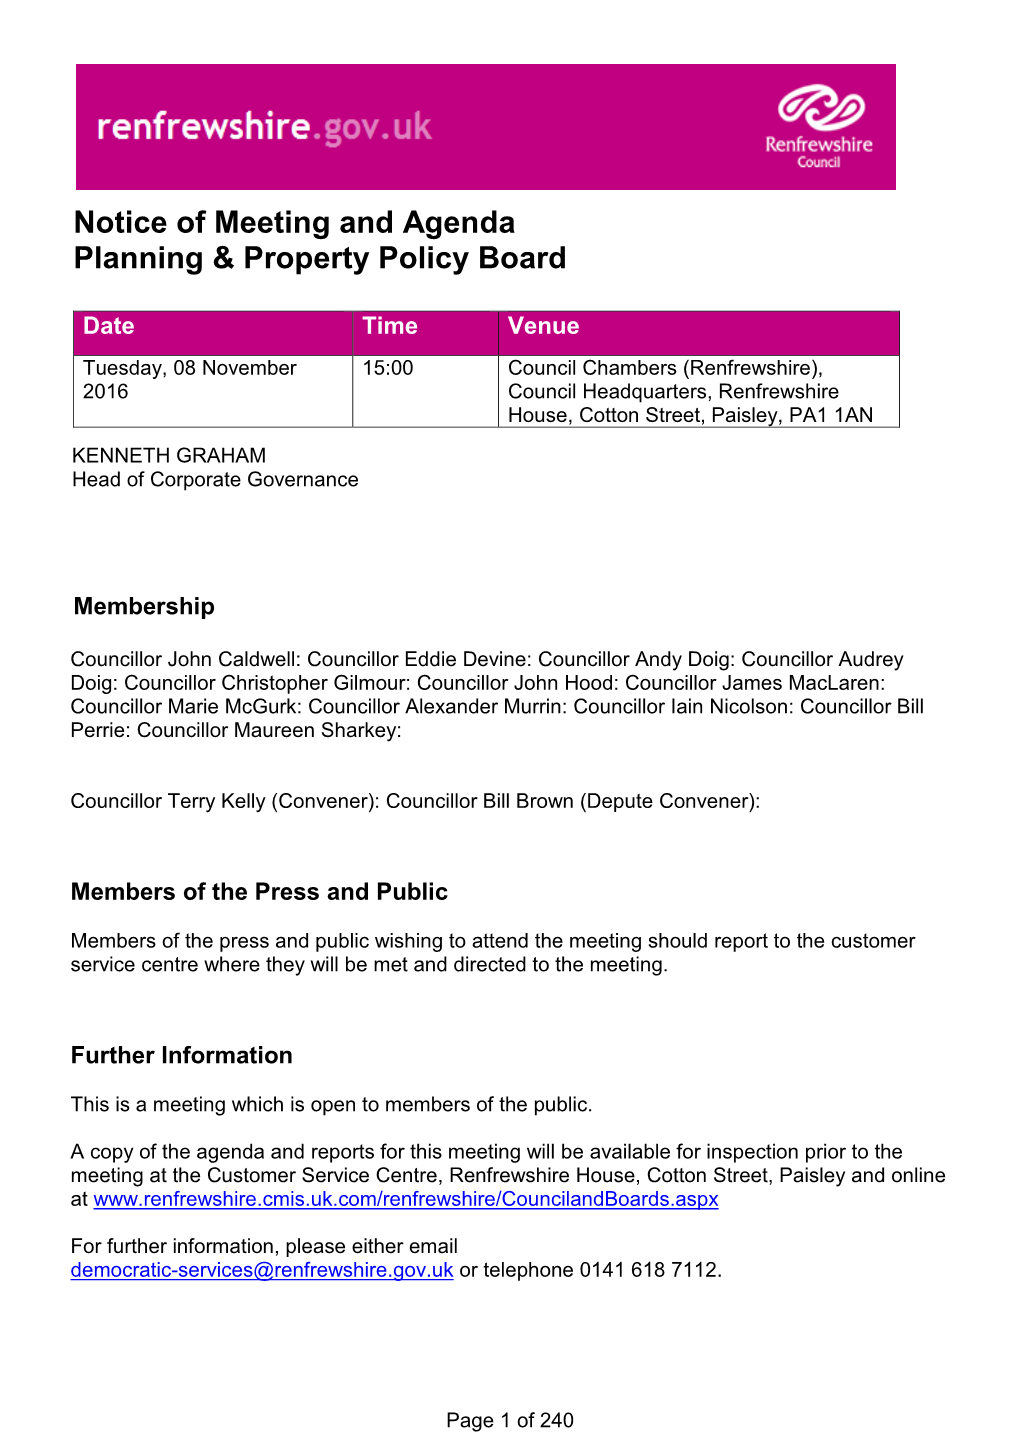 Notice of Meeting and Agenda Planning & Property Policy Board